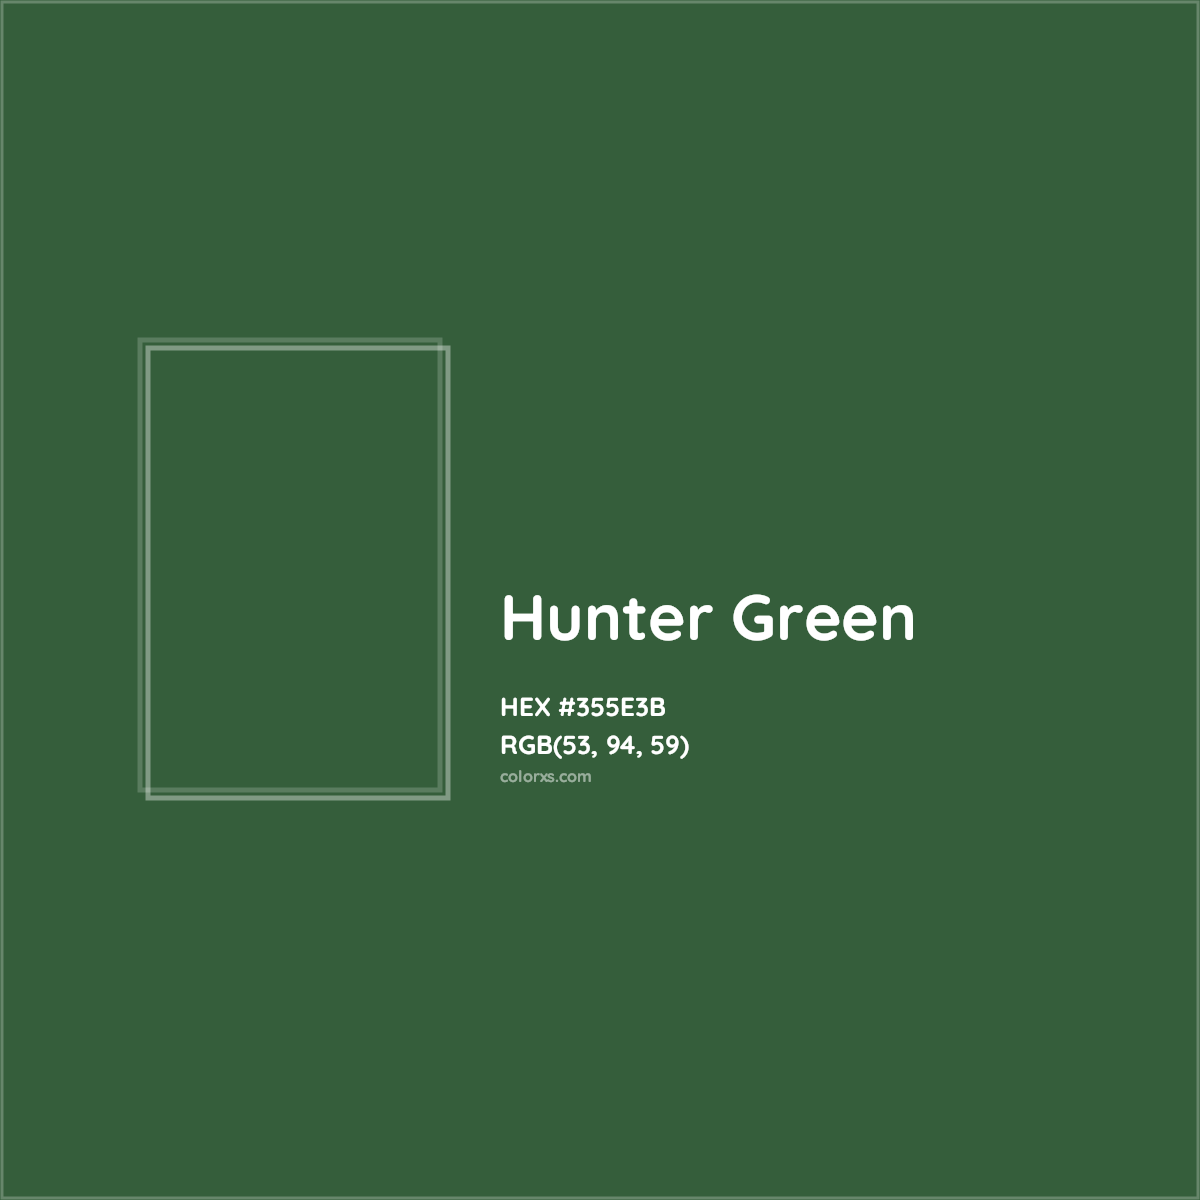 About Hunter Green - Color codes, similar colors and paints 